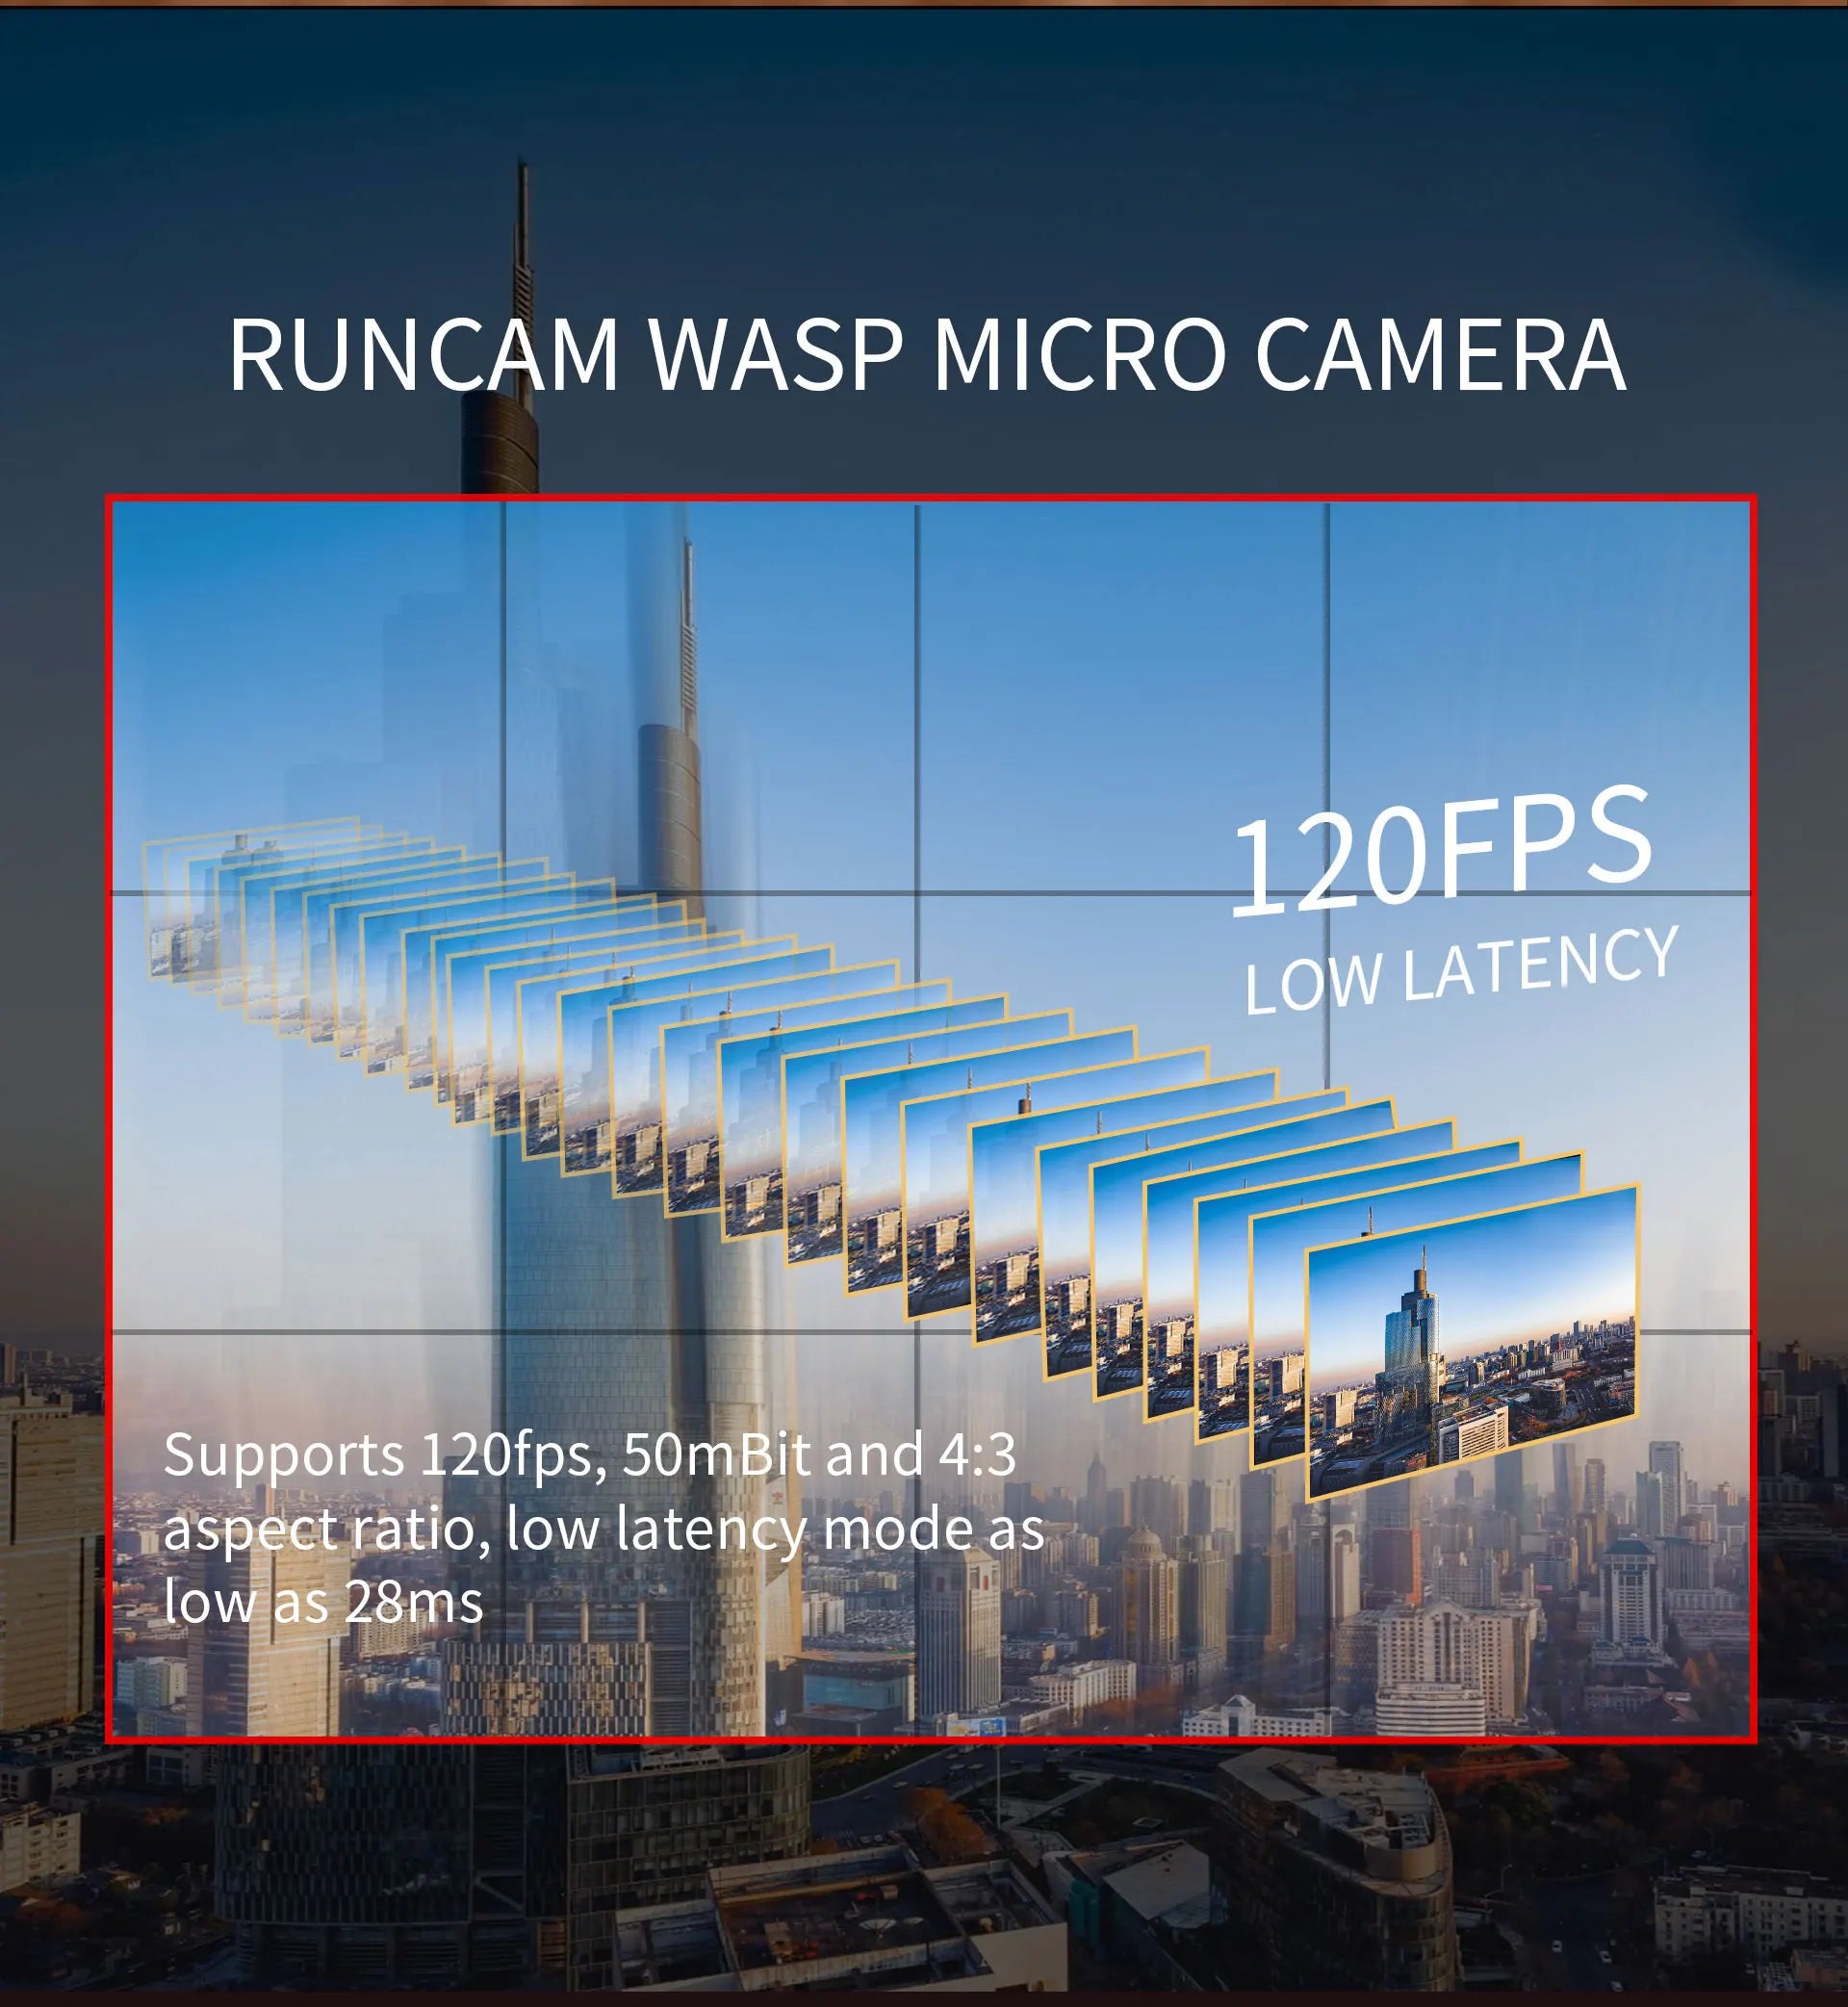 RunCam Link Wasp, RUNCAM WASP MICRO CAMERA 120EPS LATENCY Supports 120